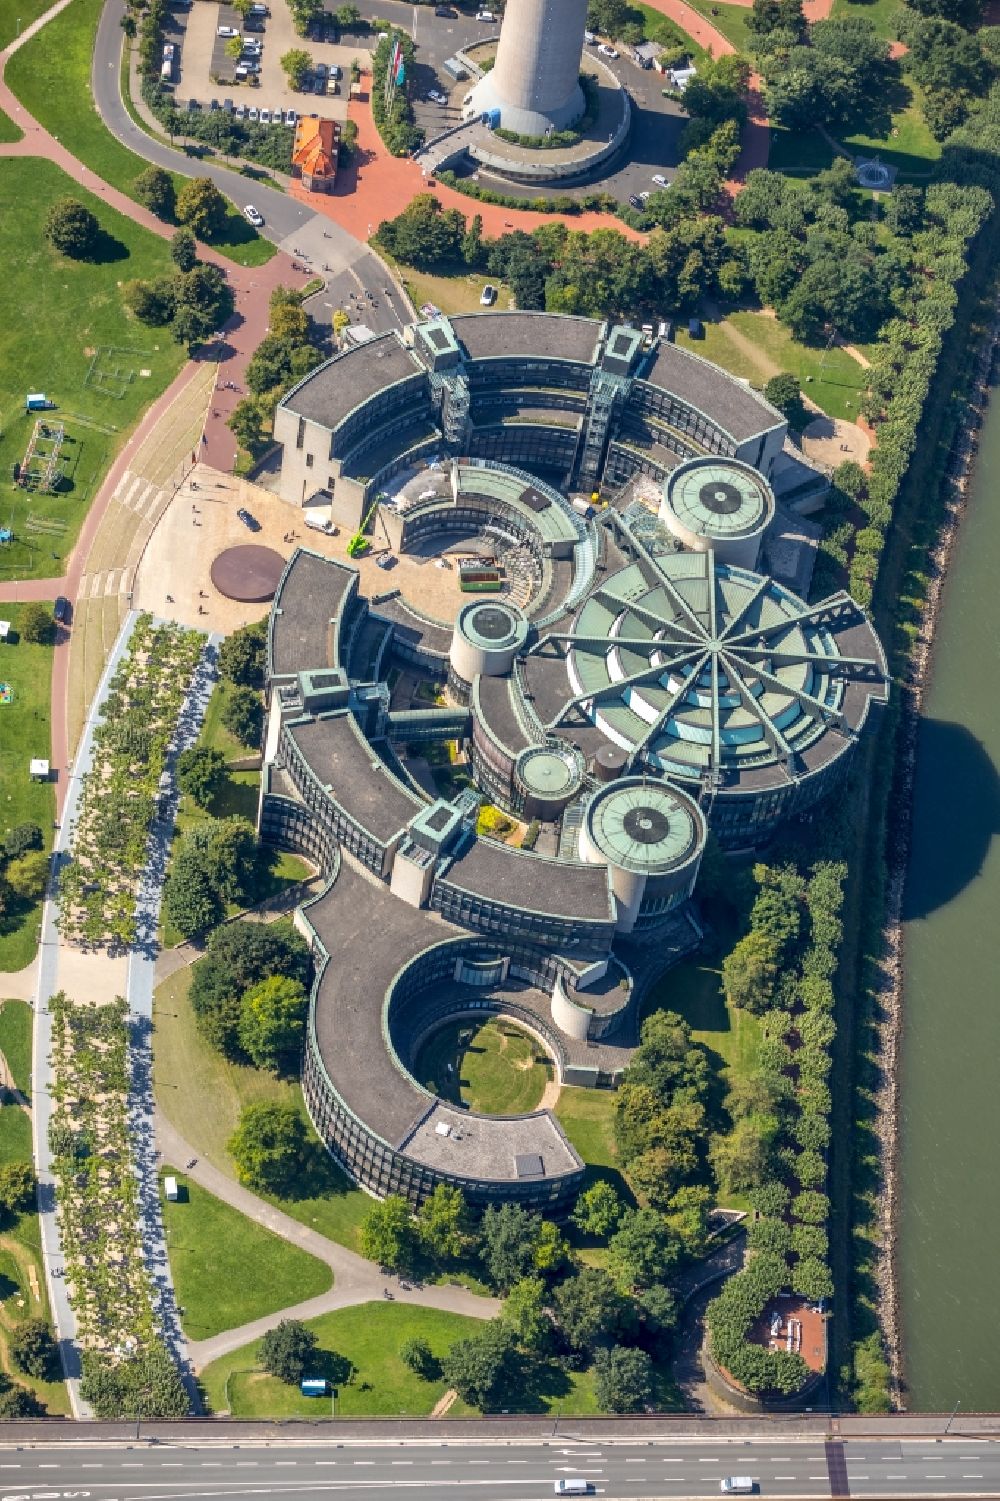 Aerial image Düsseldorf - Building of parliament from Dusseldorf to the seat of the state government and the country's parliament on the banks of the river Rhine in Dusseldorf in North Rhine-Westphalia NRW